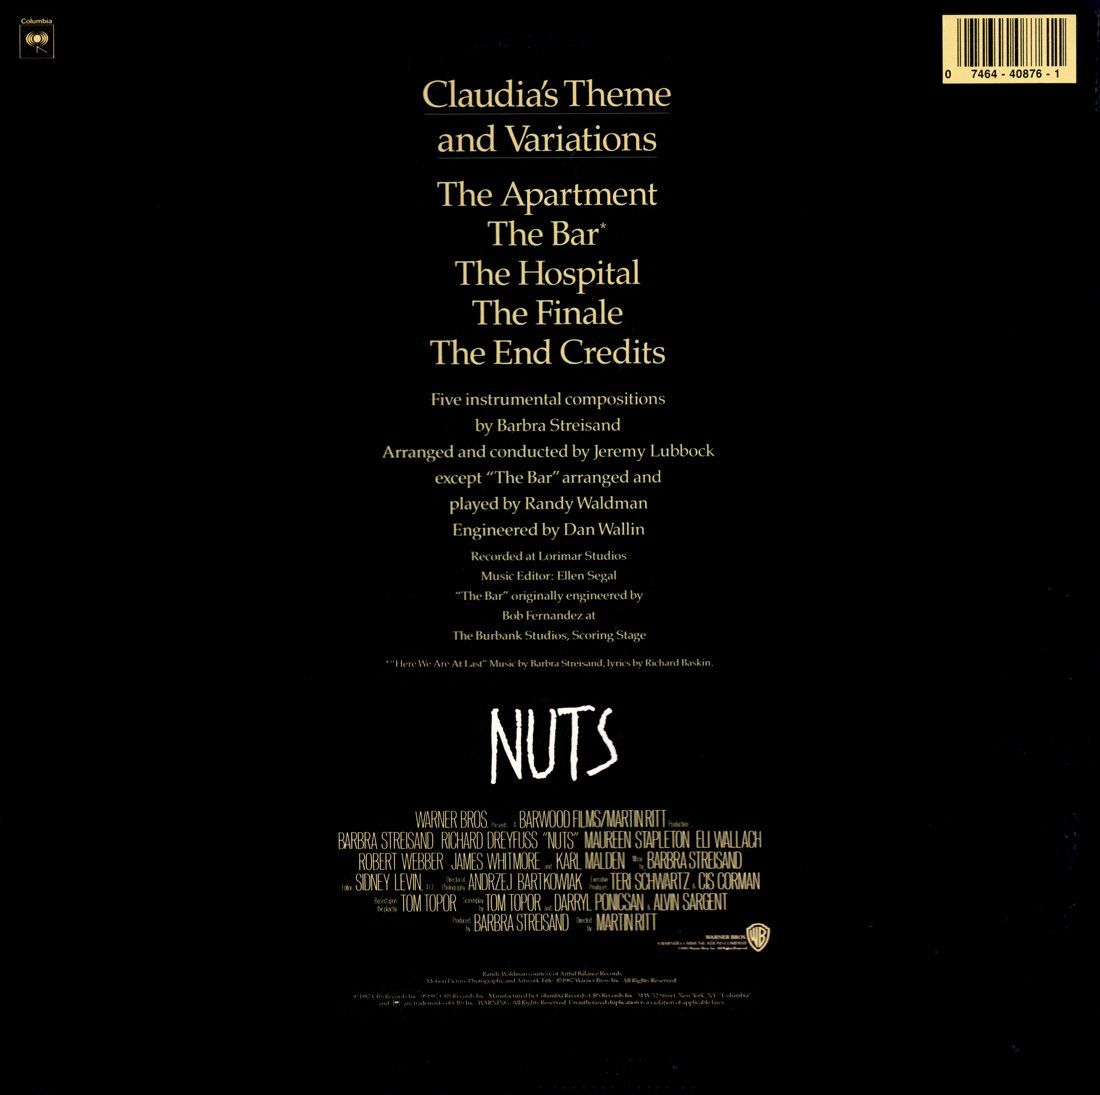 Back cover of the NUTS soundtrack on LP.